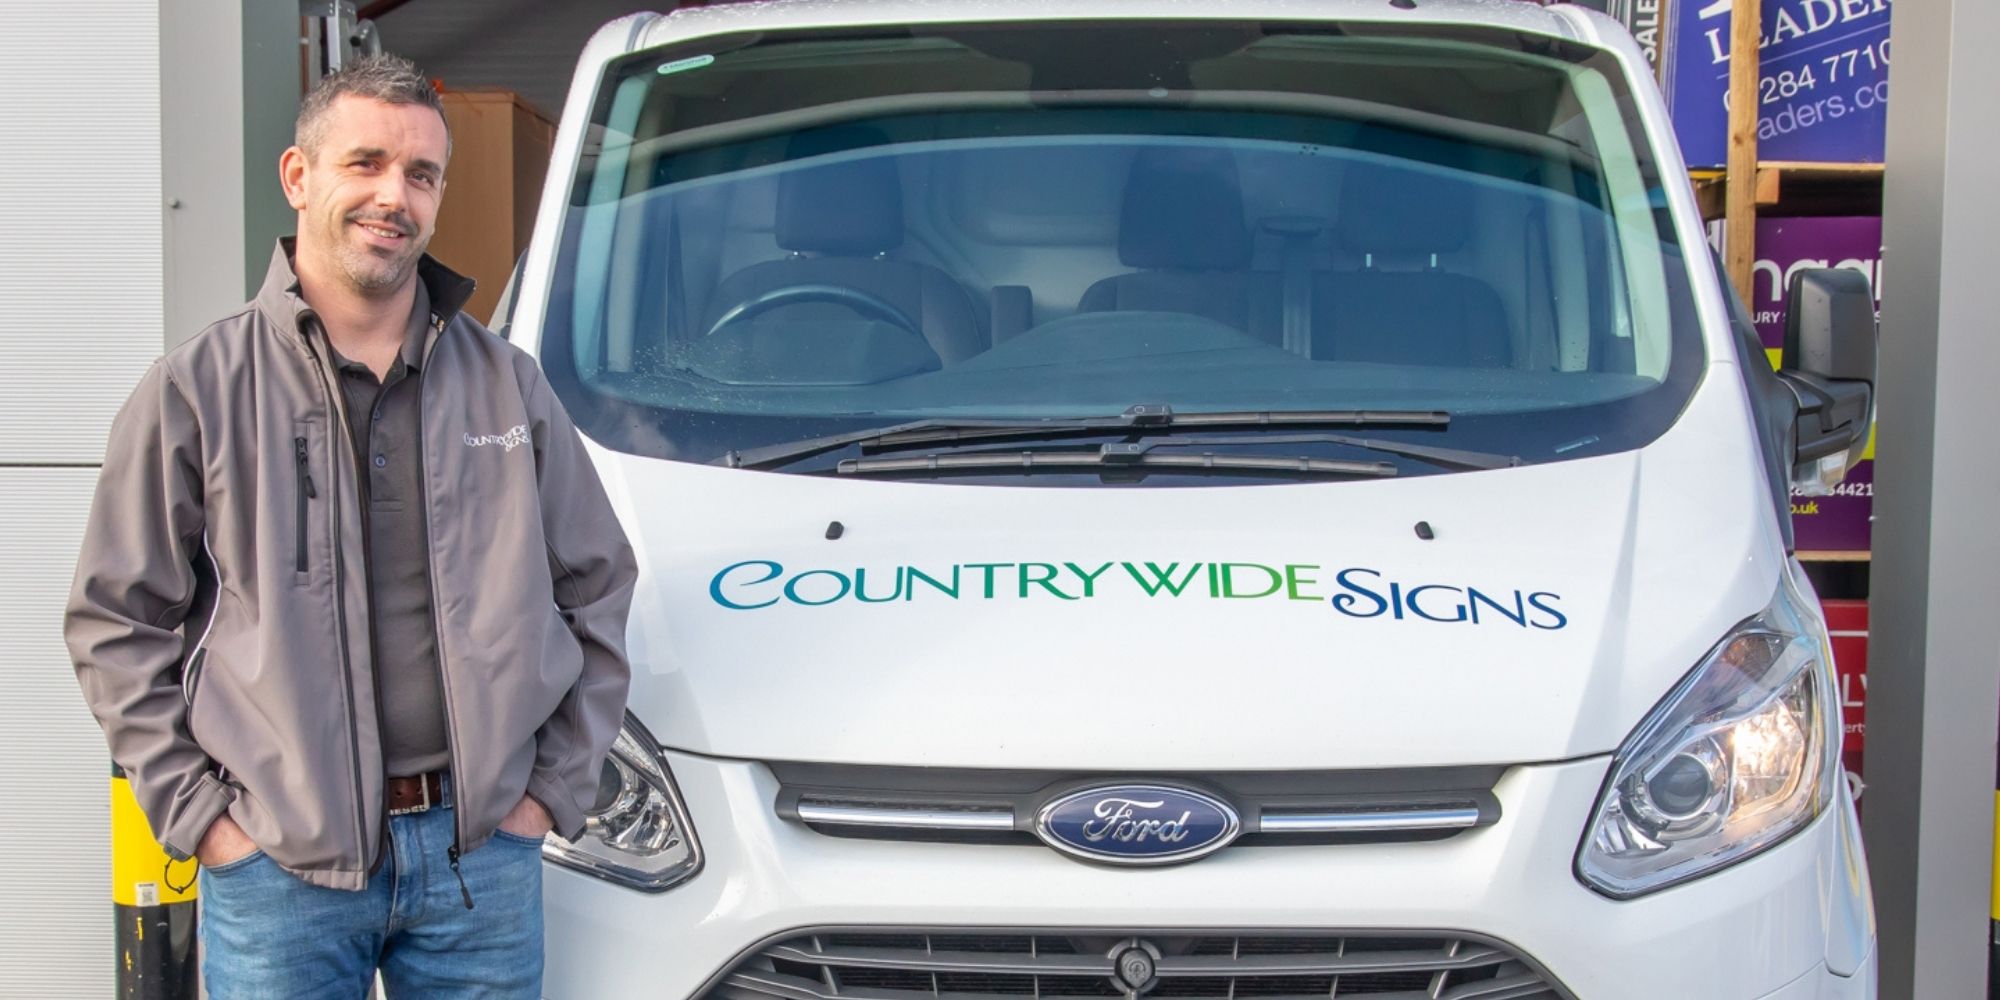 Lee Rathbone, Countrywide Signs Norfolk and East Suffolk